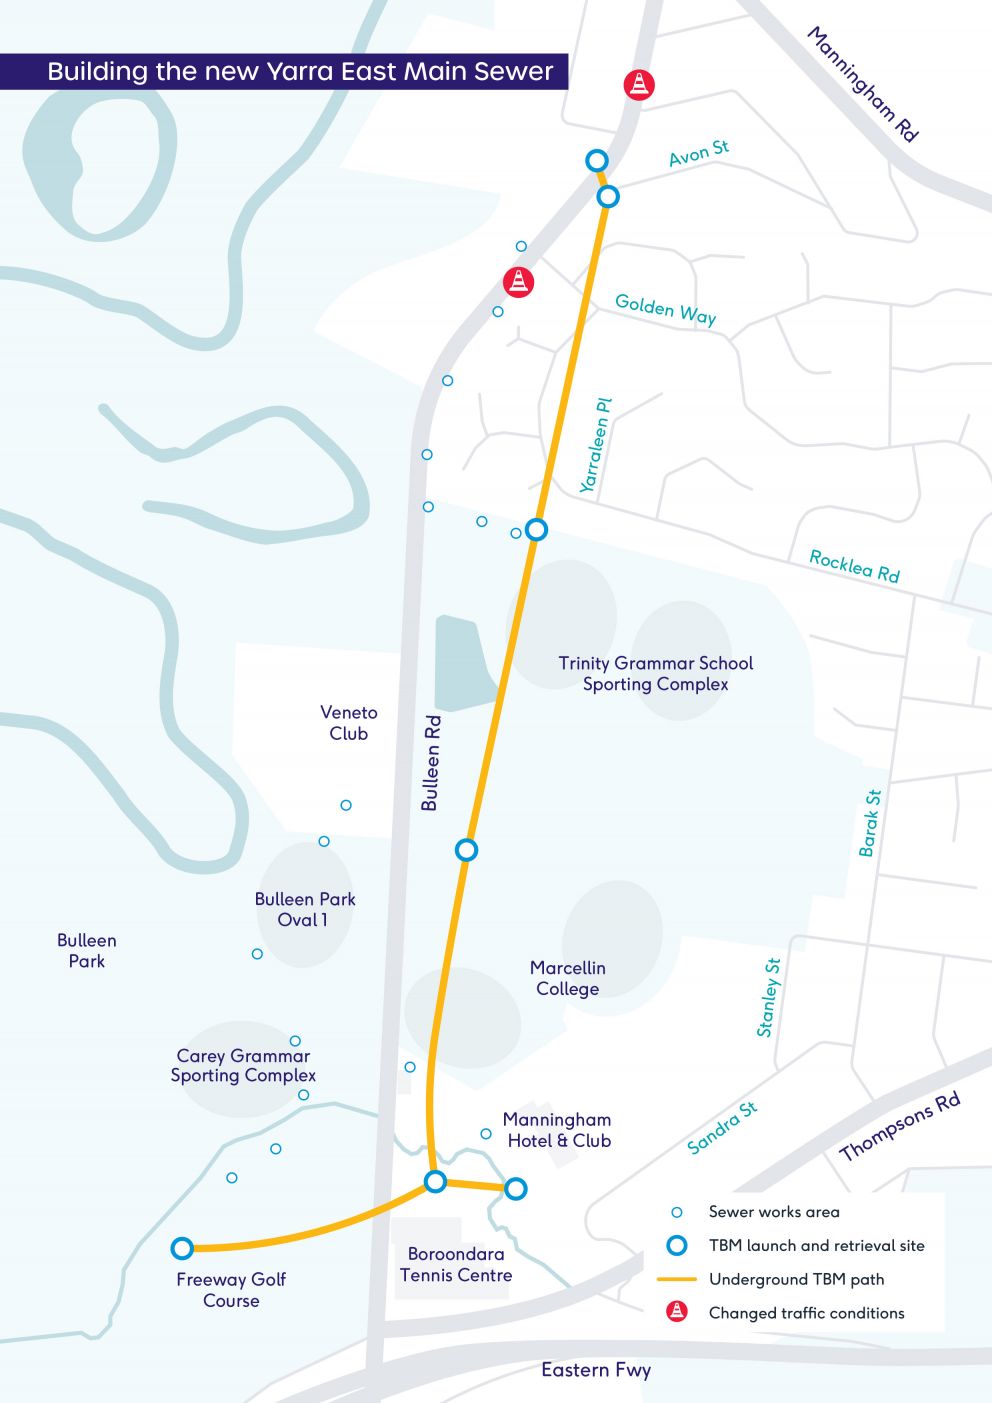 A map showing various locations of sewer works on Bulleen Road, highlighting sewer works area, TBM launch and retrieval site, underground TBM path and changed traffic conditions near Golden Way and Avon Street.